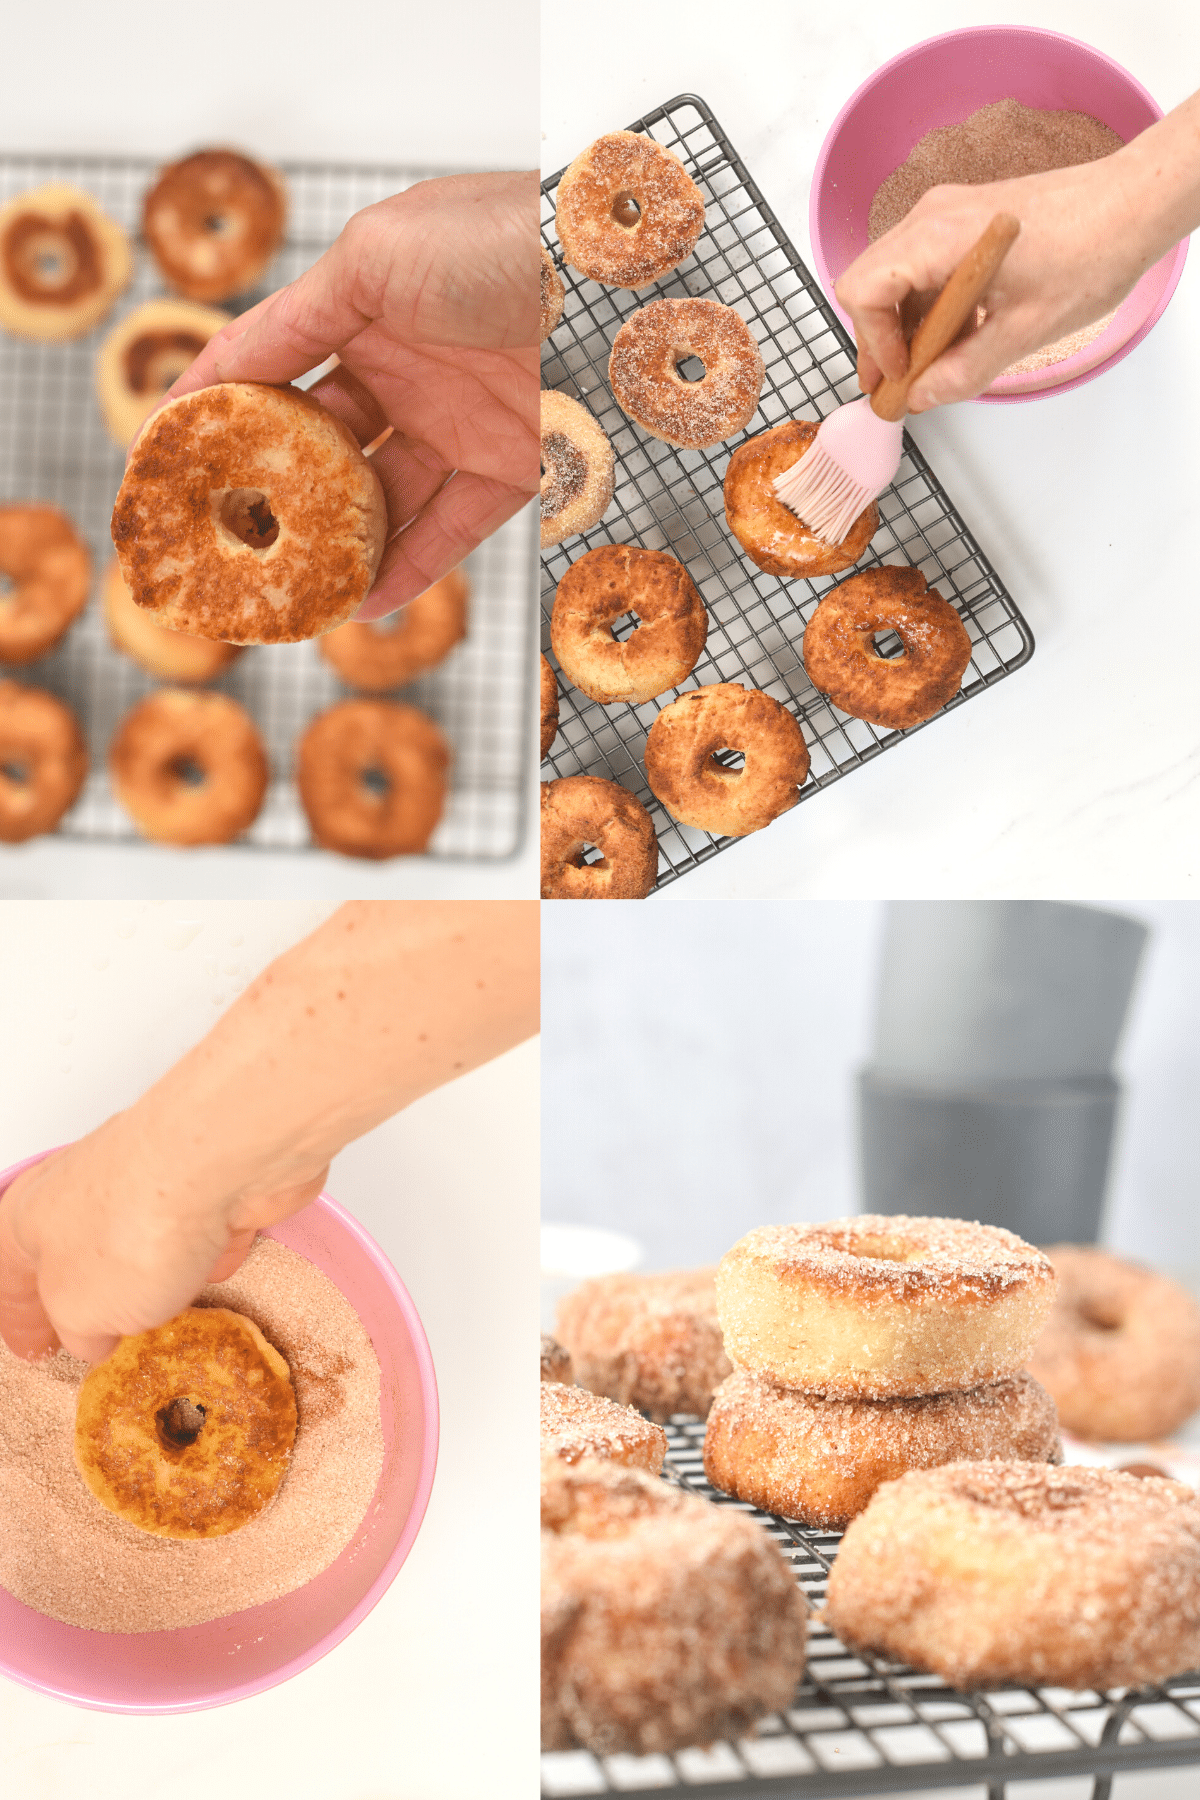 How to make Keto Donuts